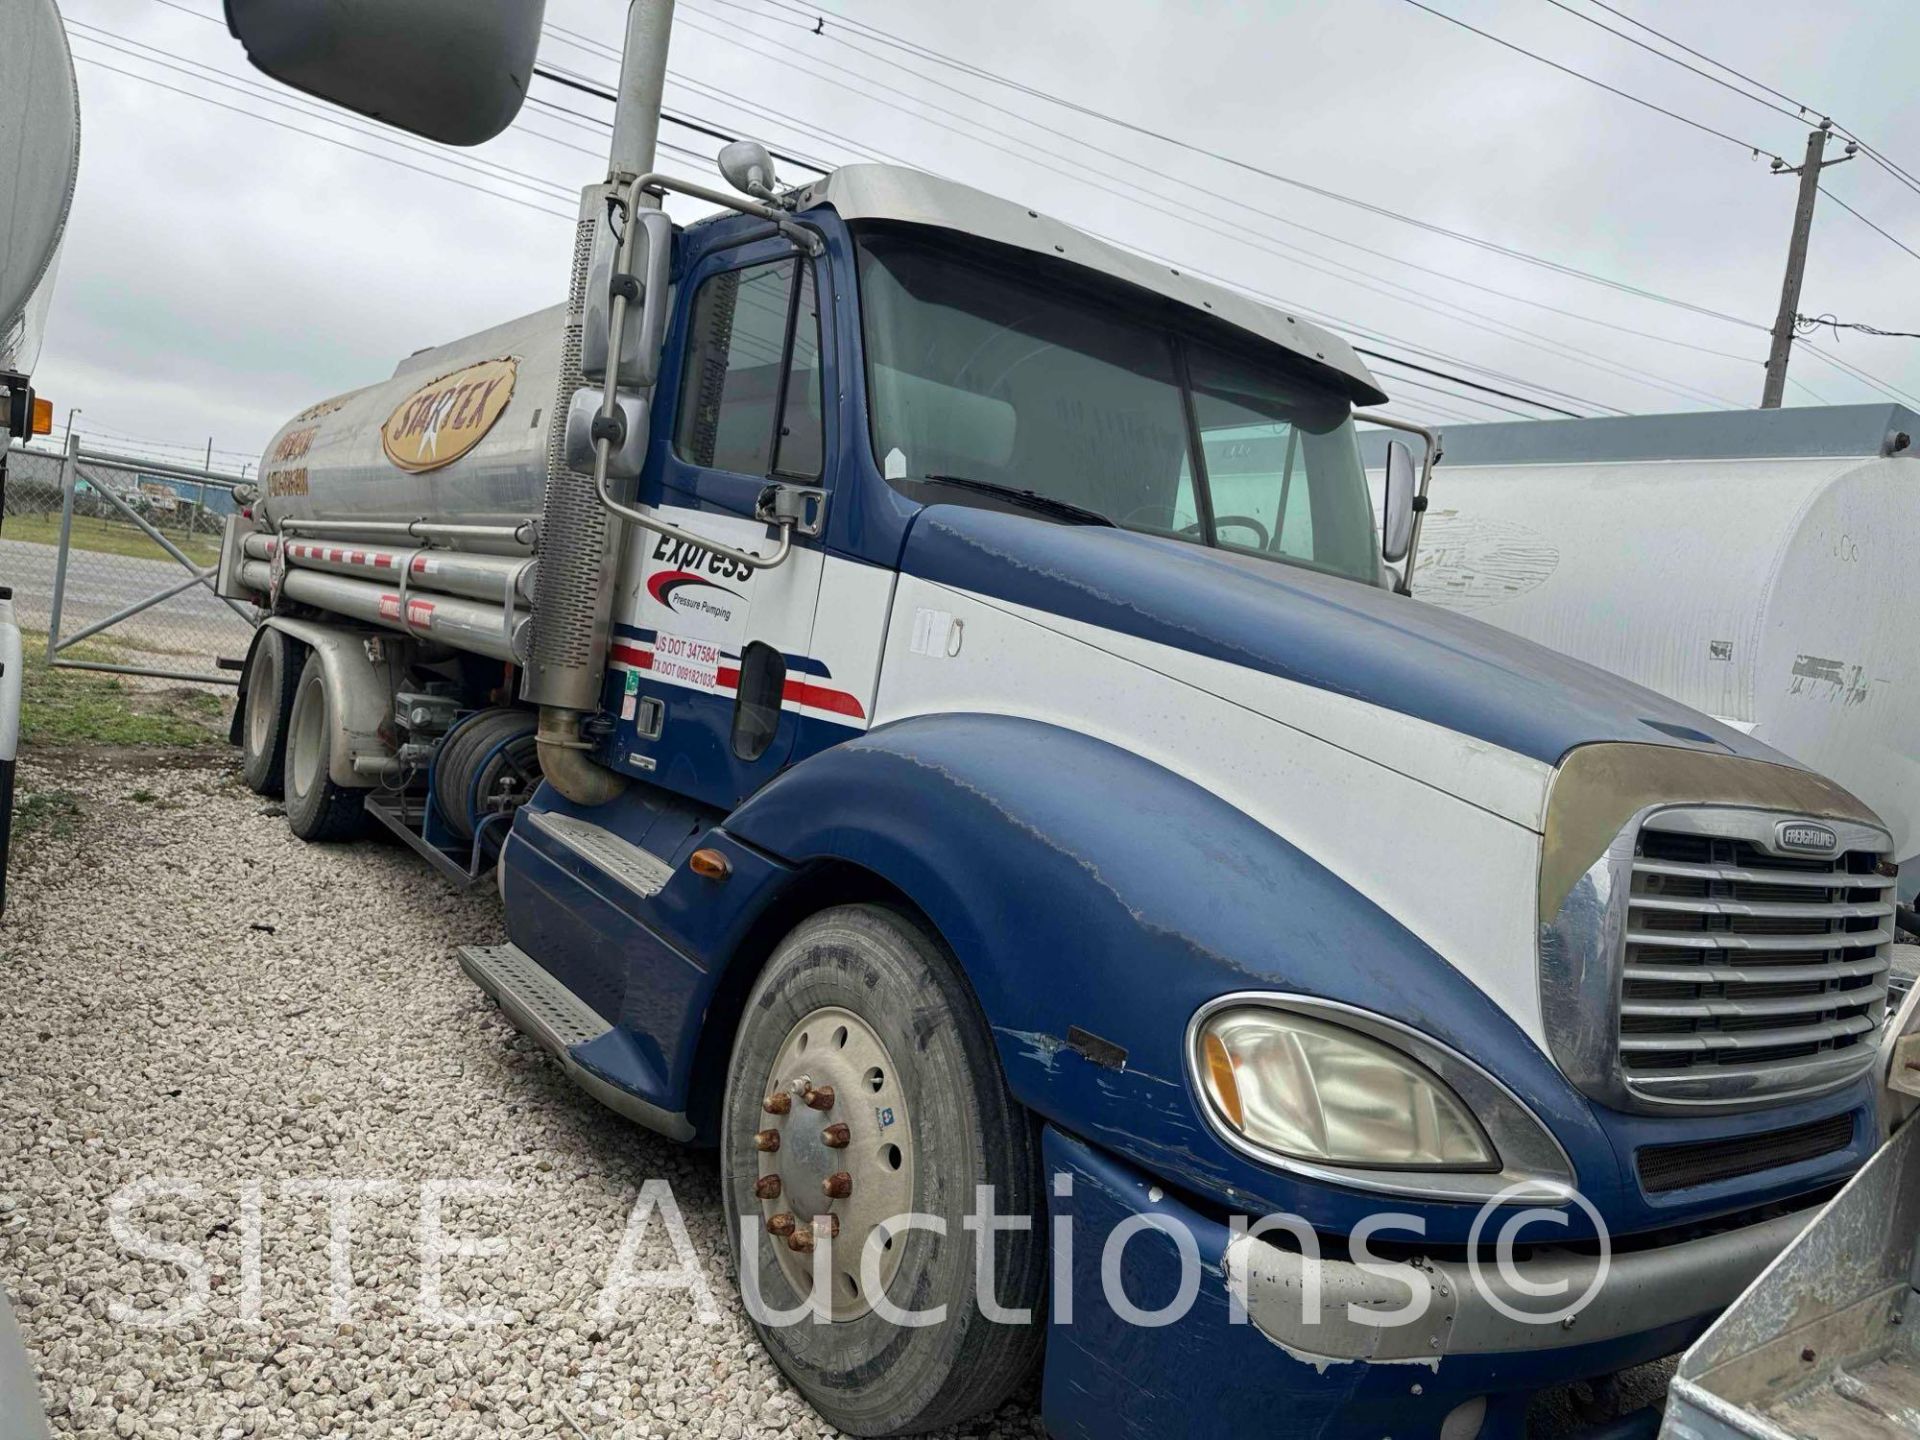 2004 Freightliner Columbia T/A Fuel Truck - Image 5 of 27